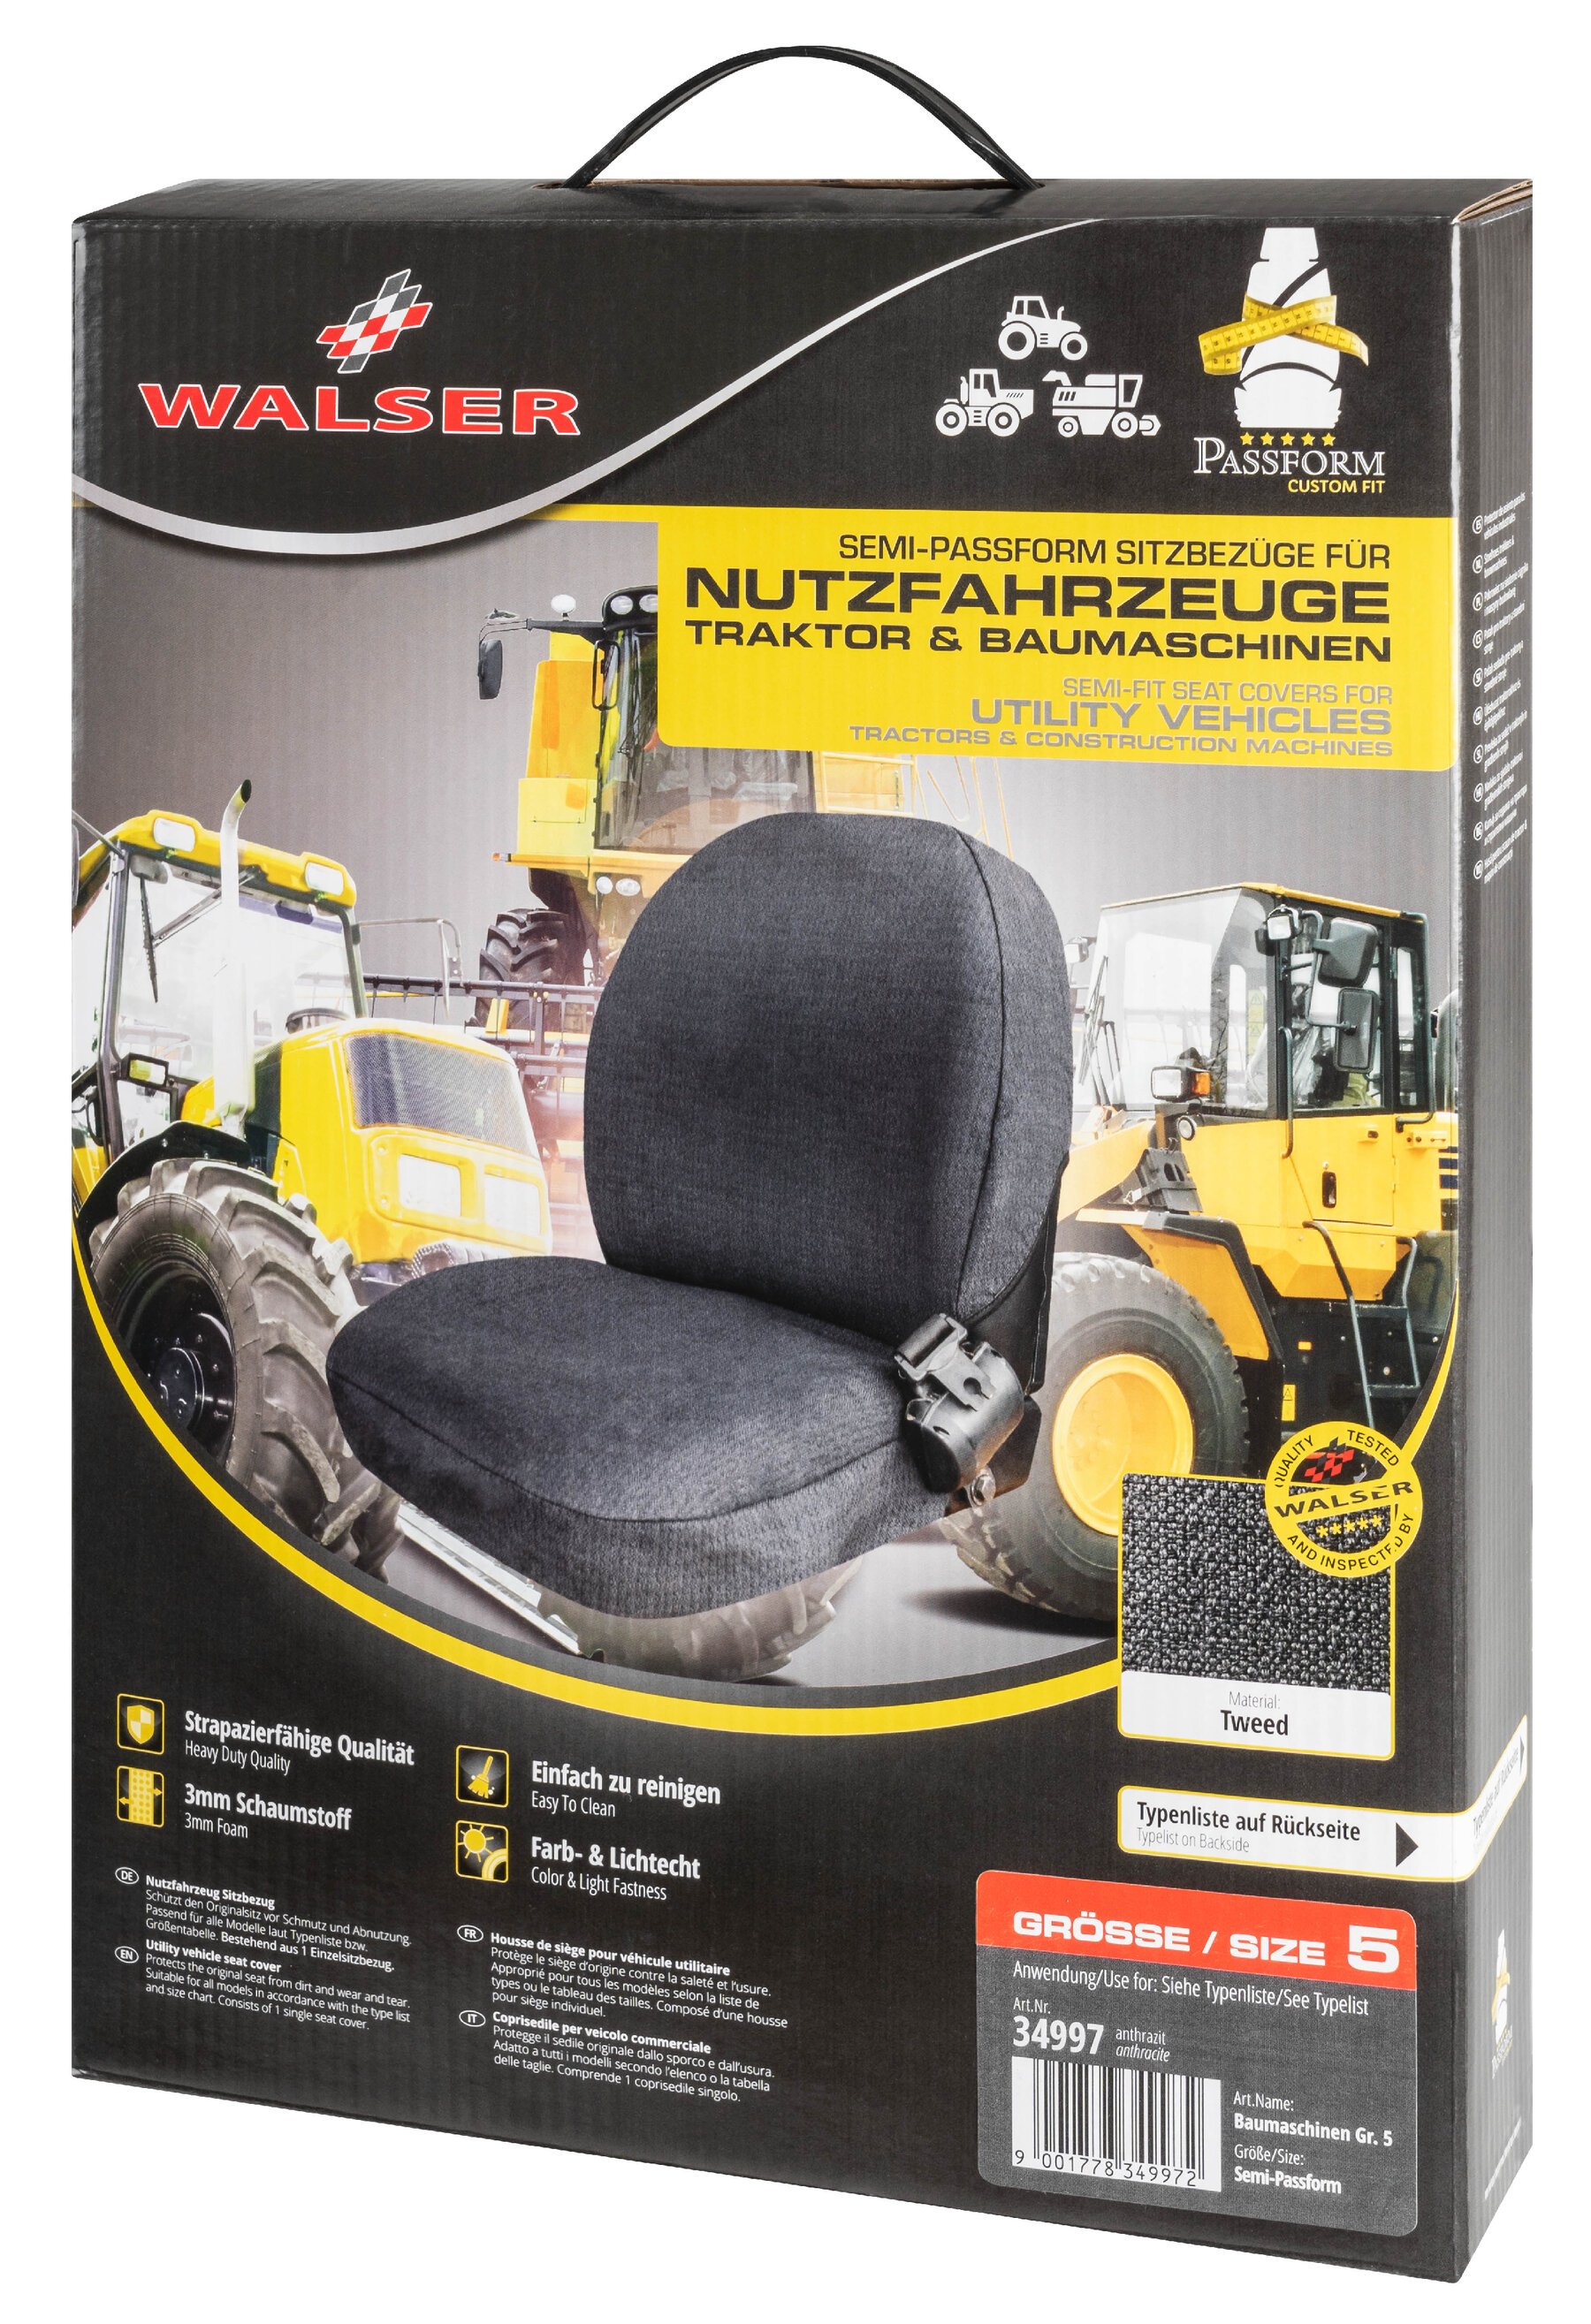 Semi-fit Seat cover for tractors and construction machinery - size 5